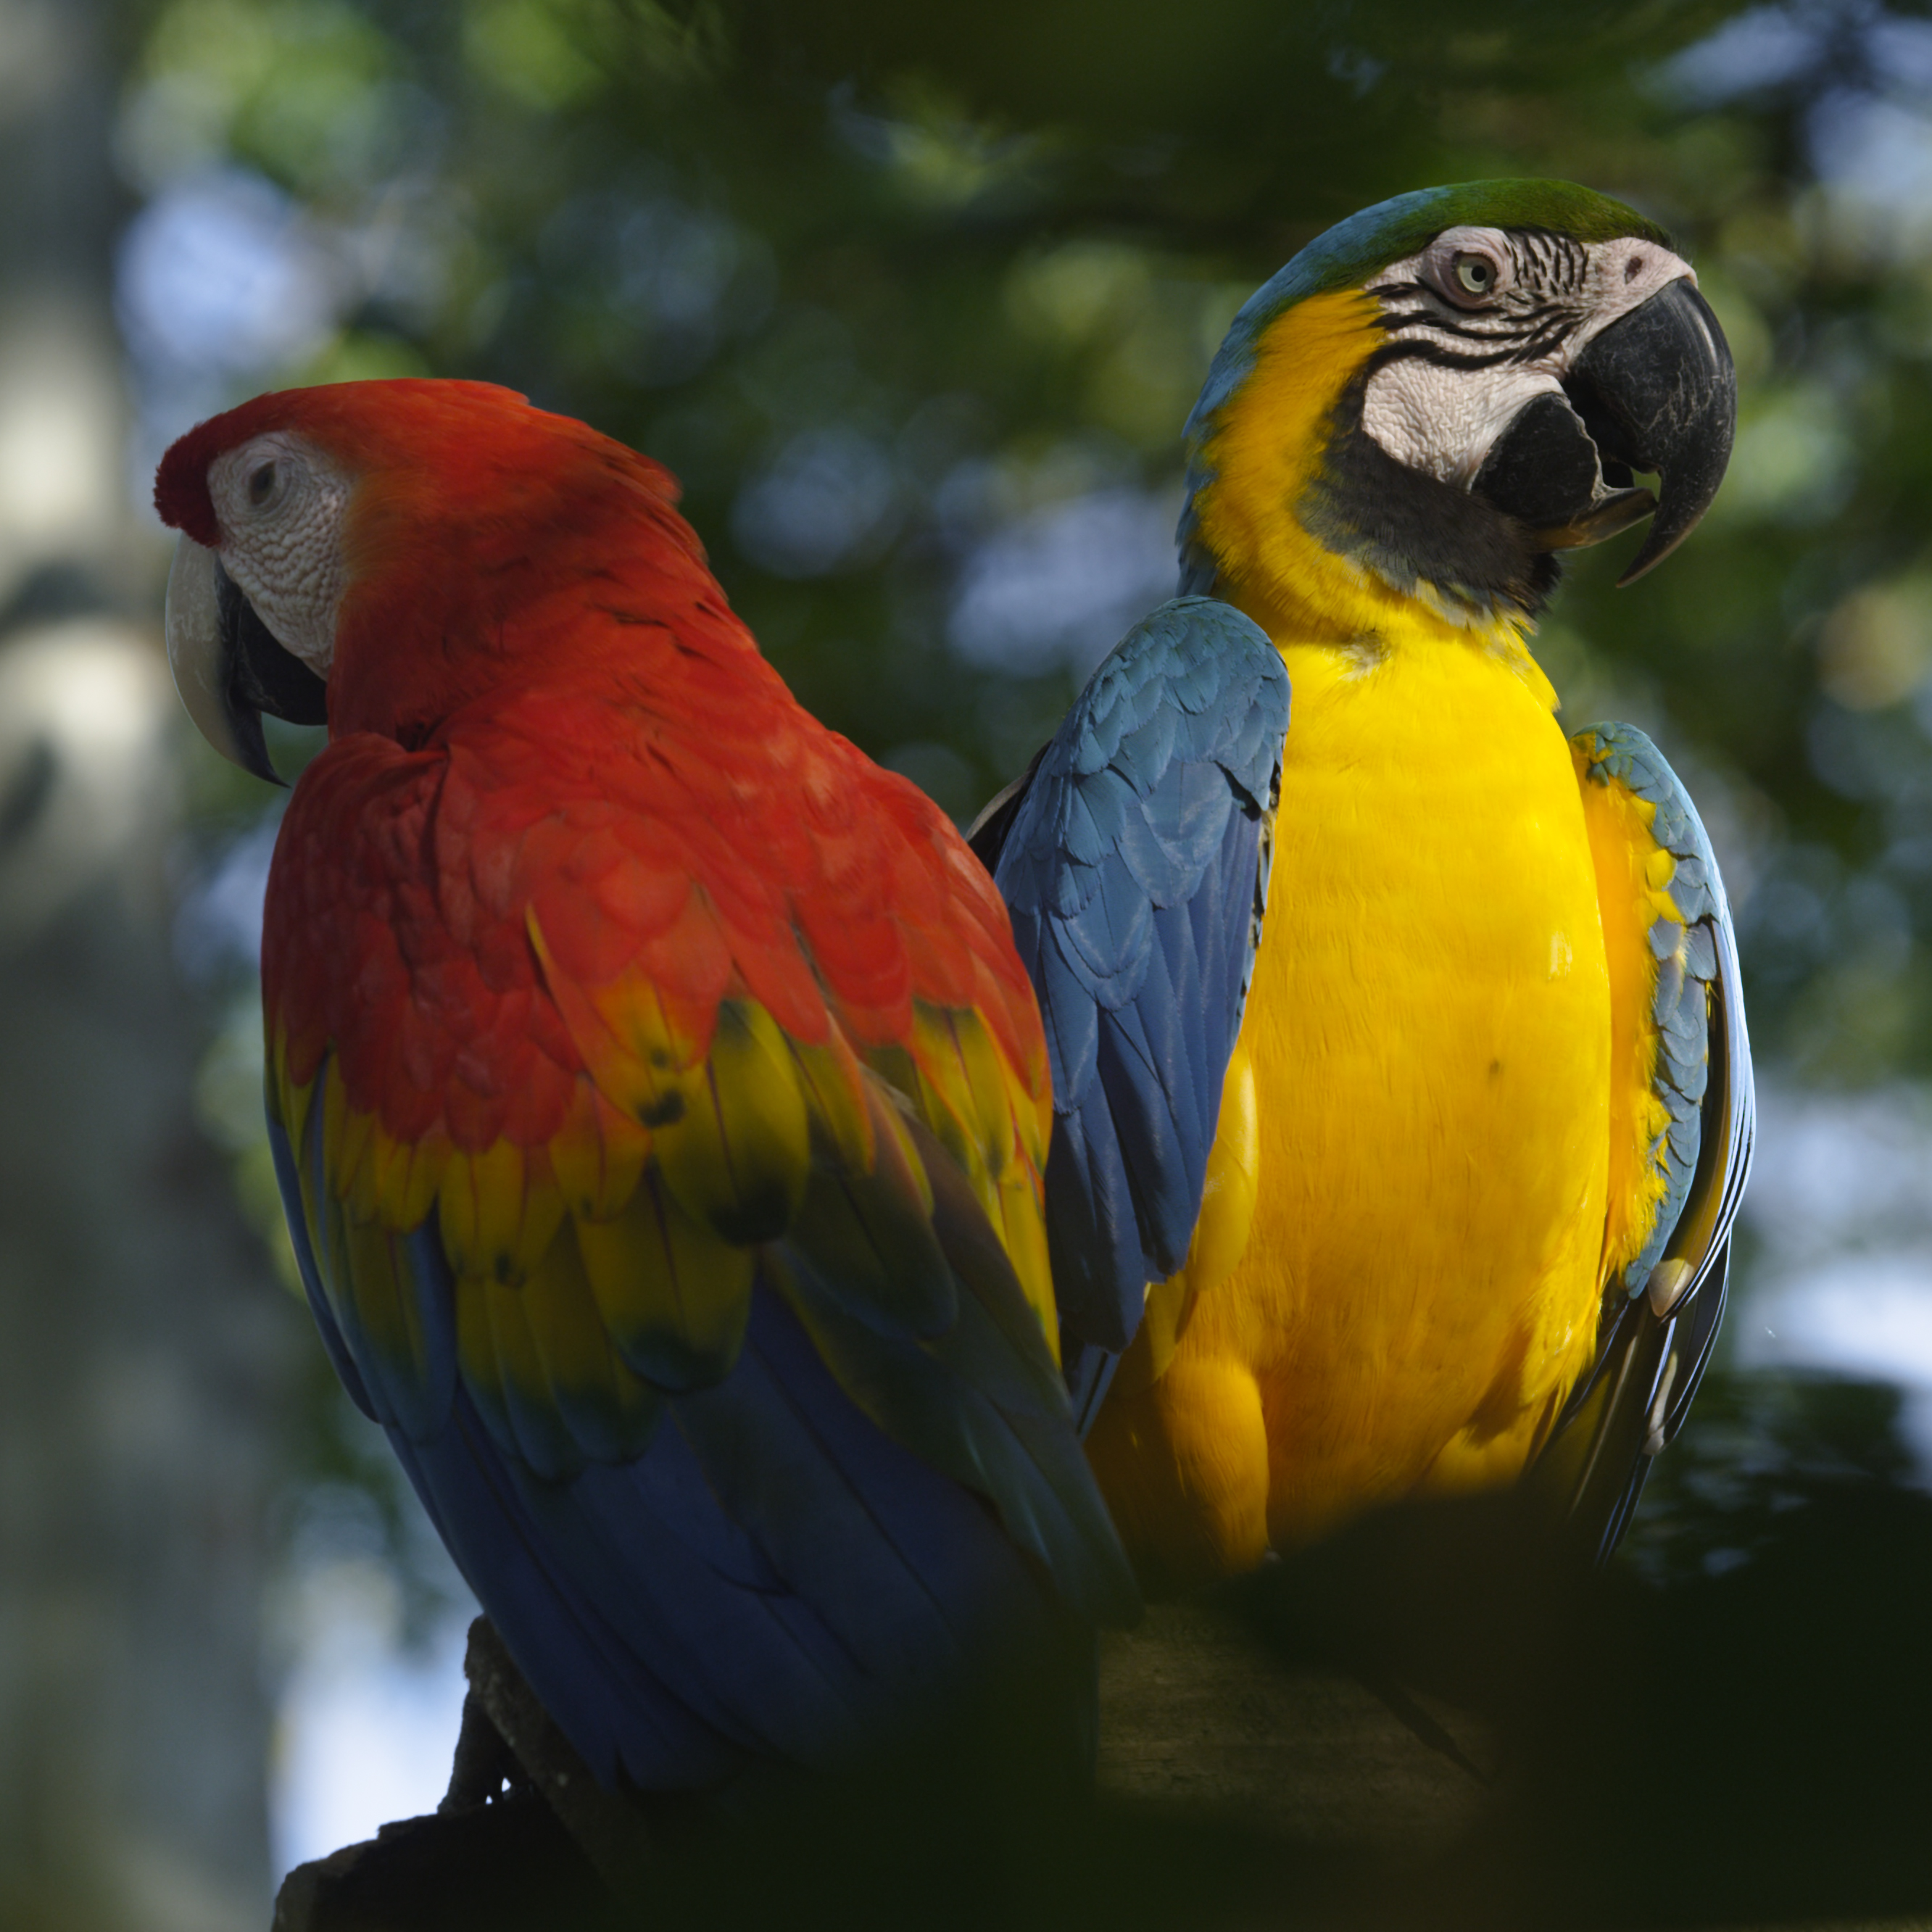 A pair of Macaws in the Amazon rainforest. Iquitos, Peru.